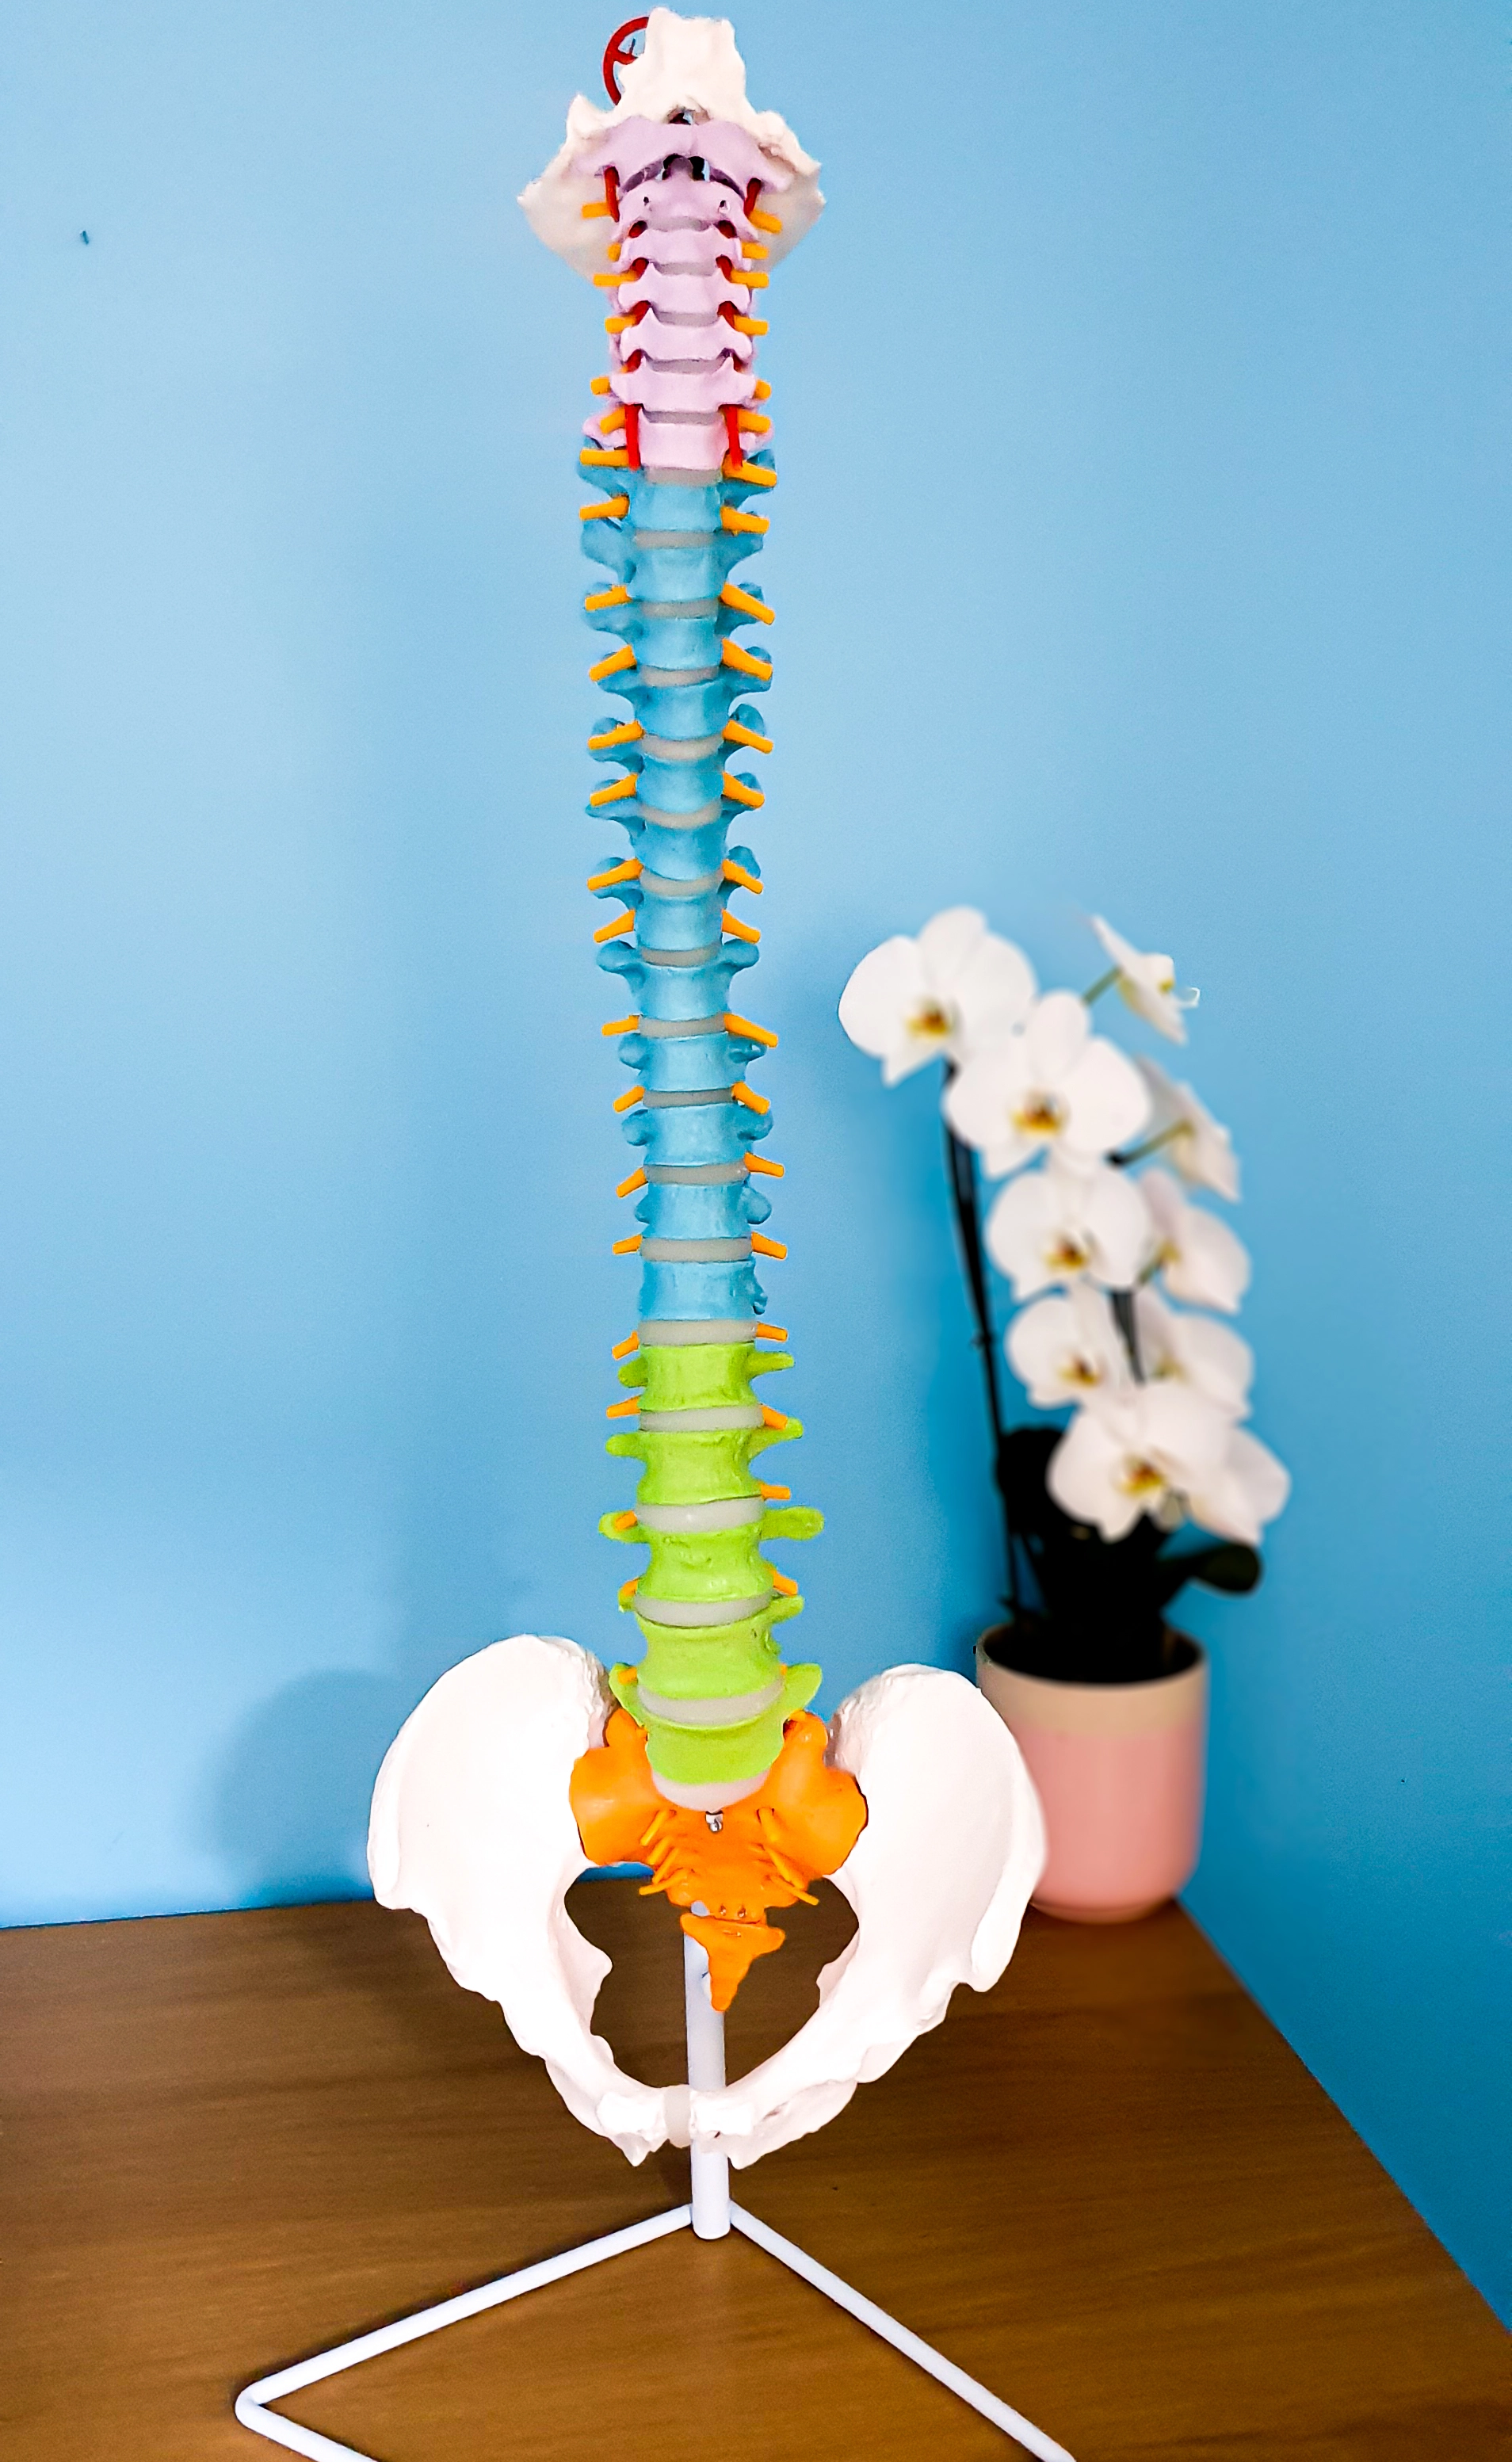 Chiropractic spine model, blue background.